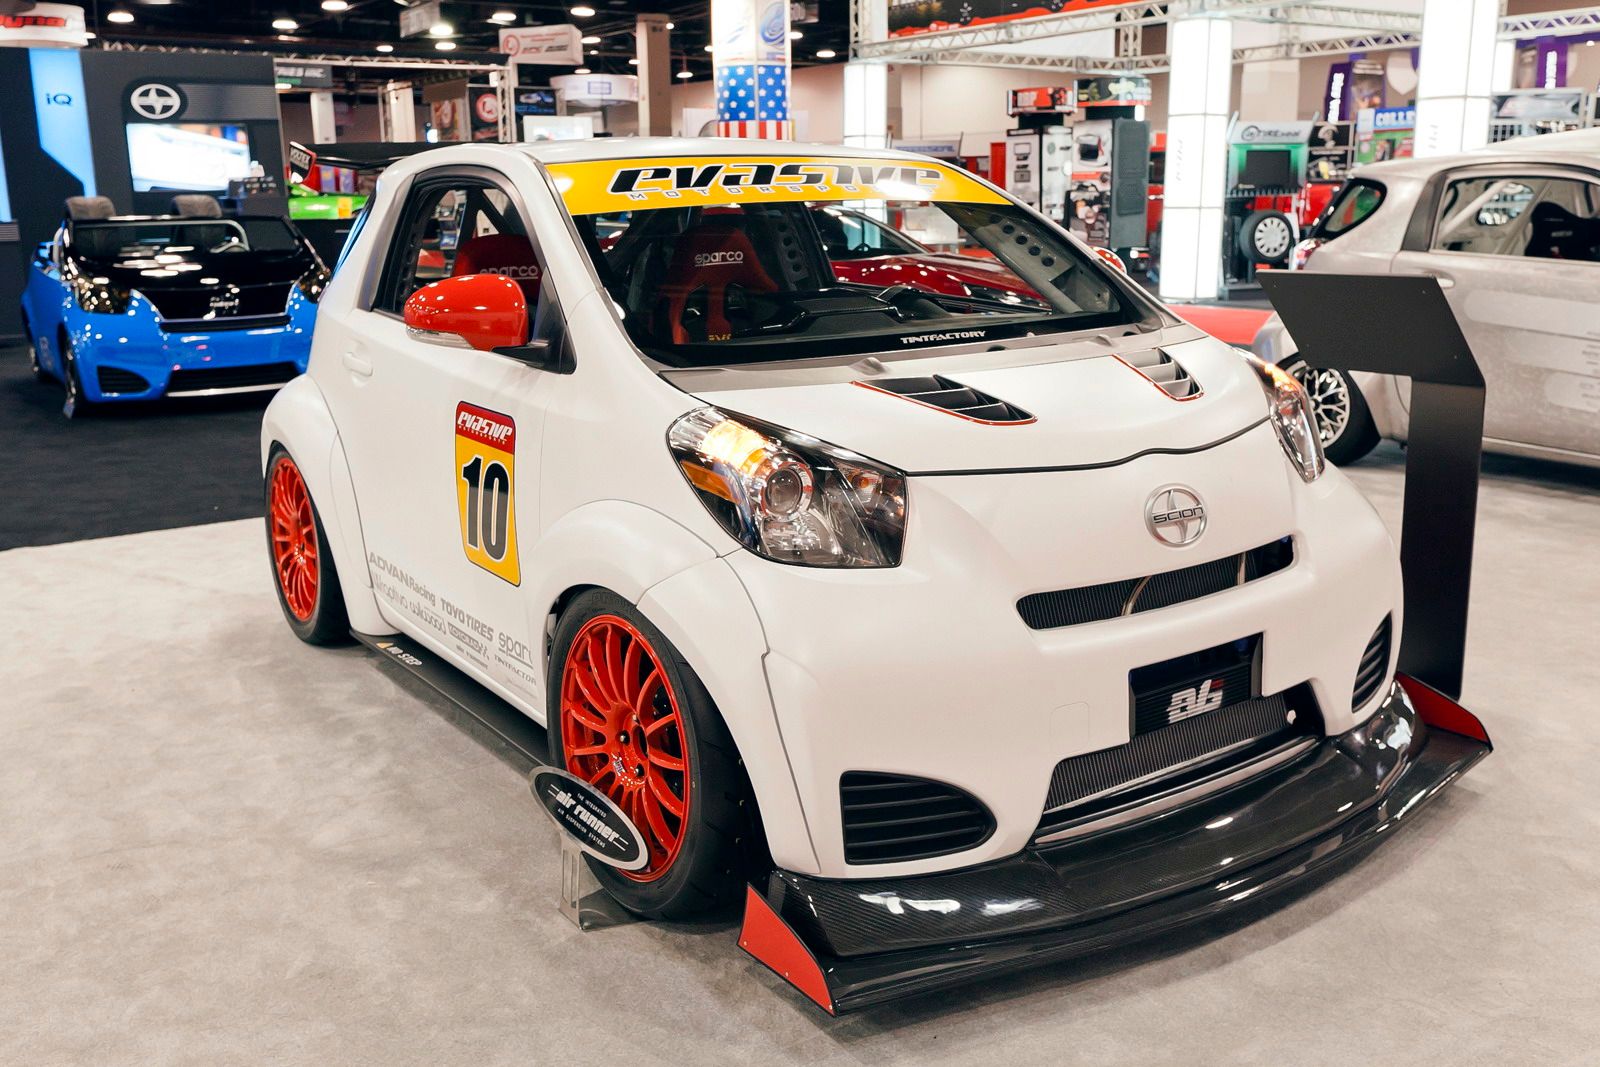 2011 Scion iQ-RS by Michael Chang